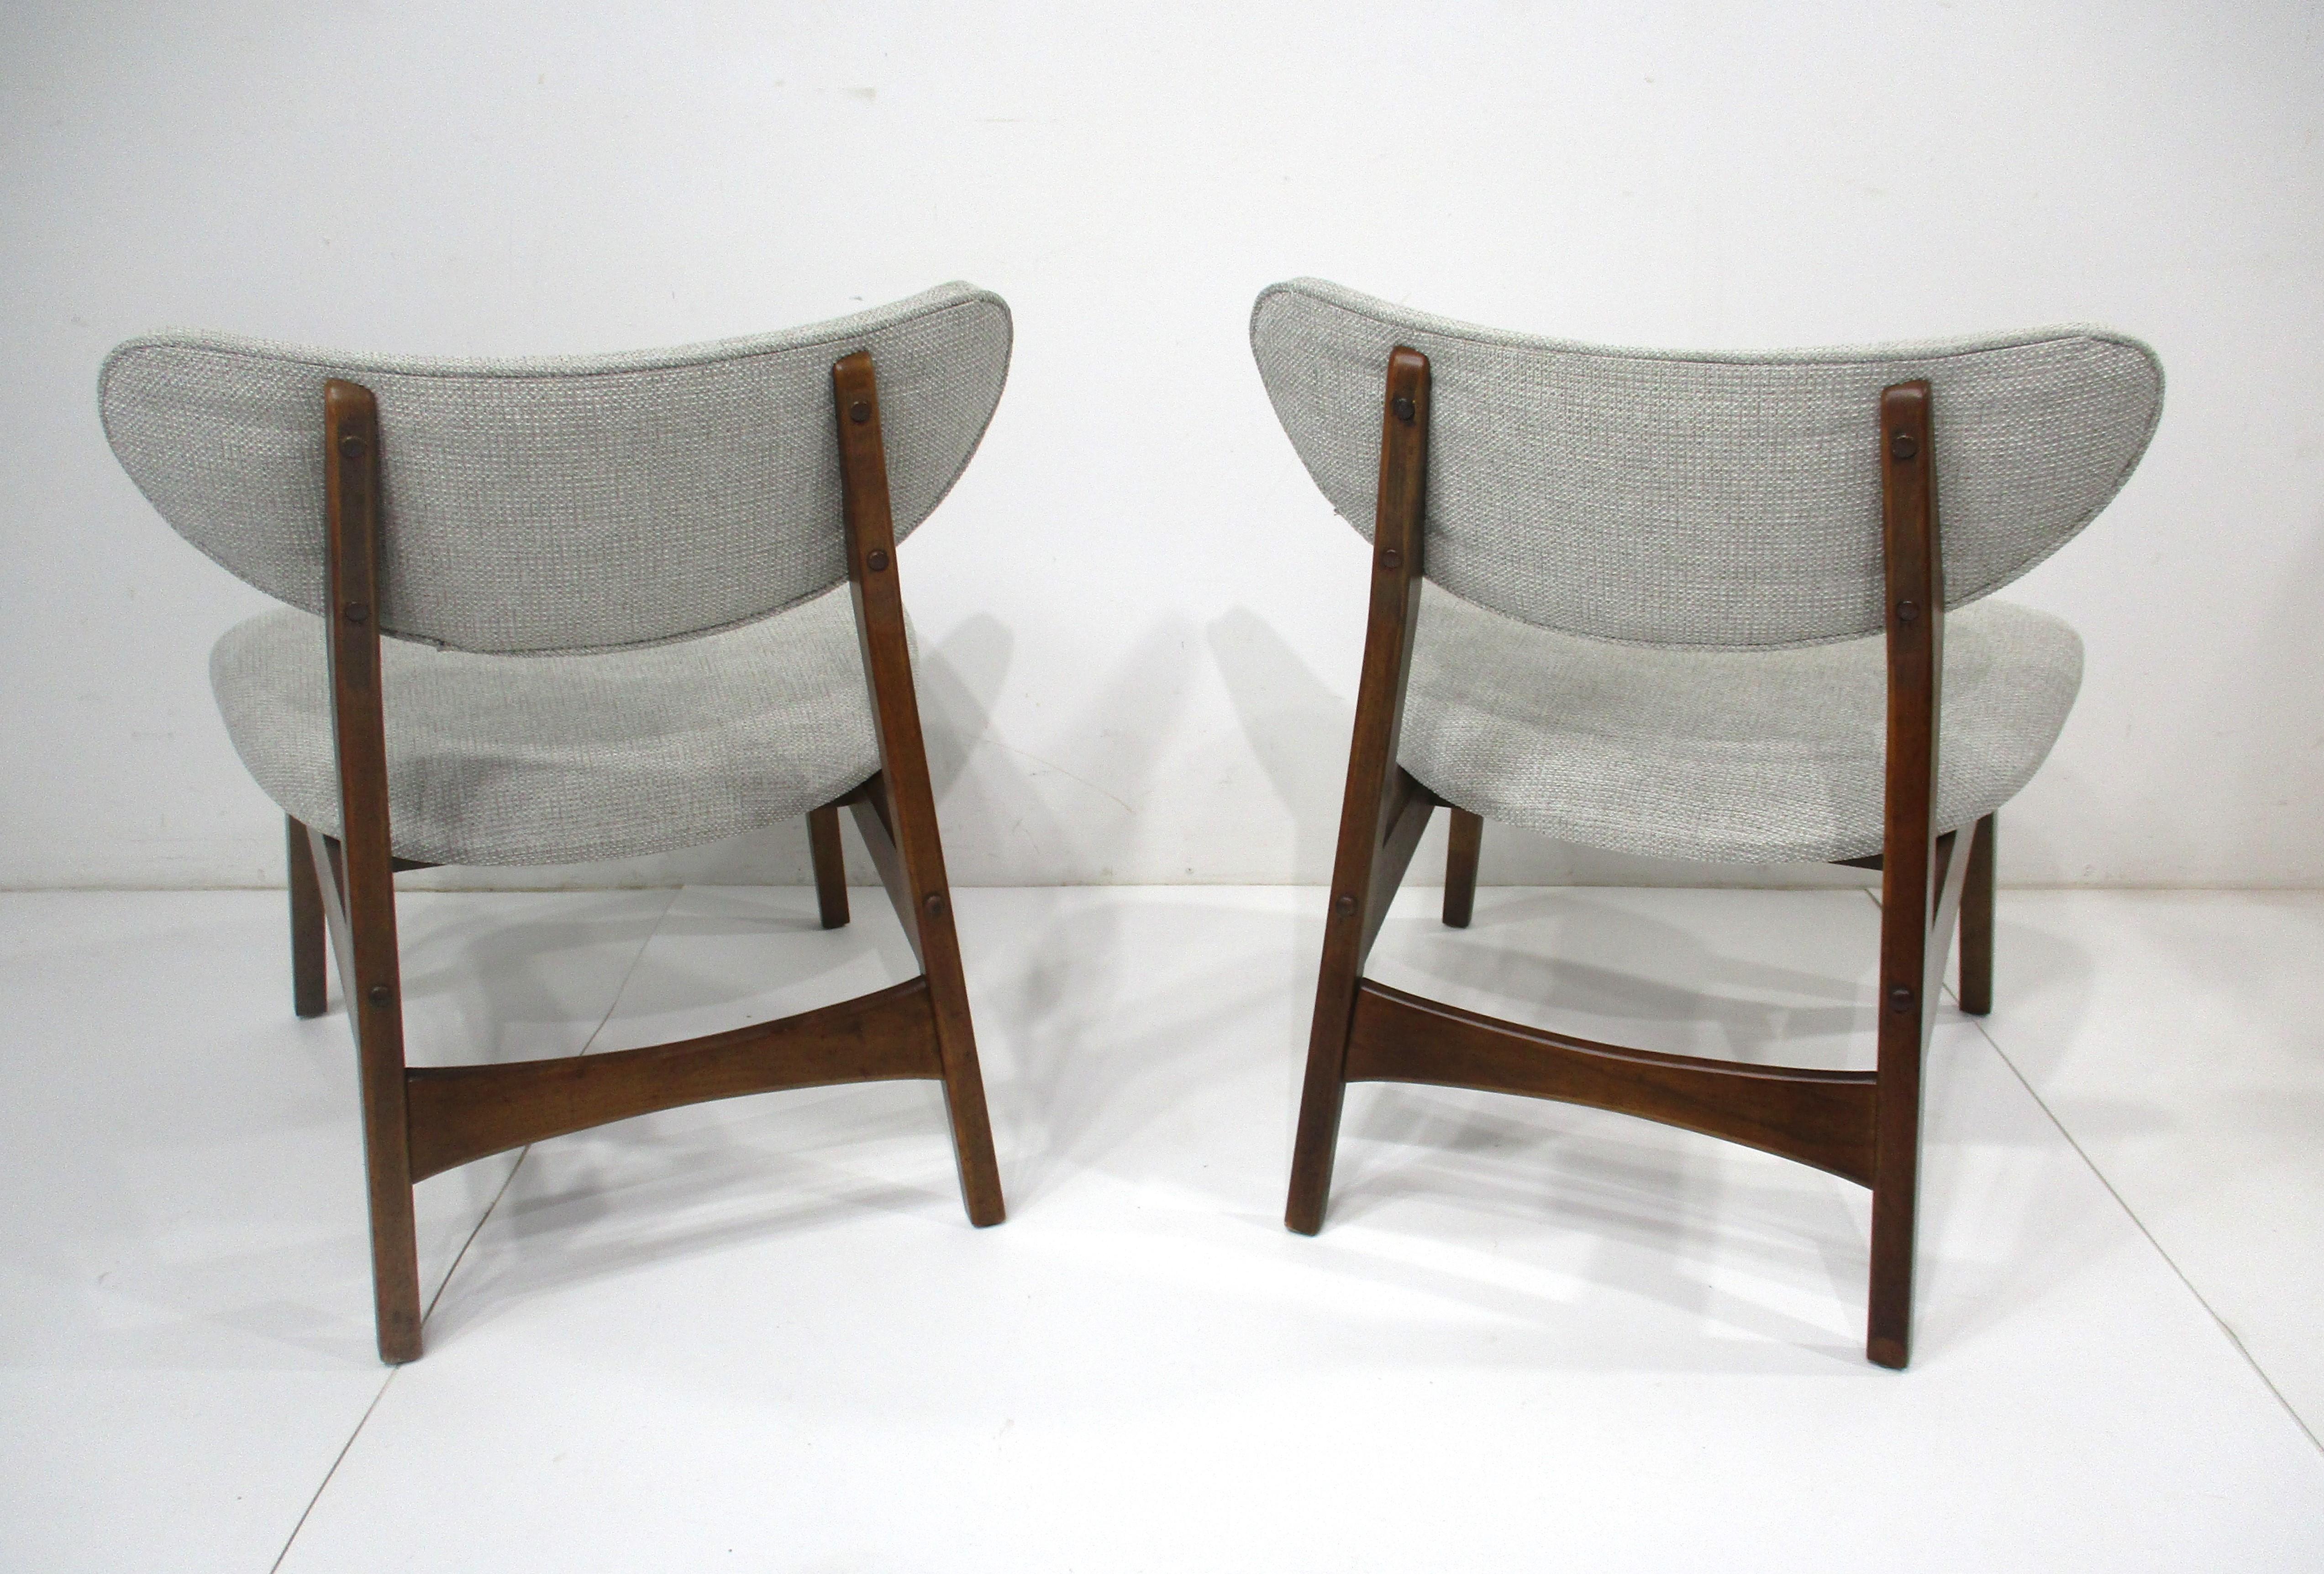 A pair of low lounge chairs with dark walnut toned wood frames and upholstered bottom and curved back . Having a very comfortable sitting position with plenty of support for long periods of relaxing . Designed in the manner of Danish Modern and